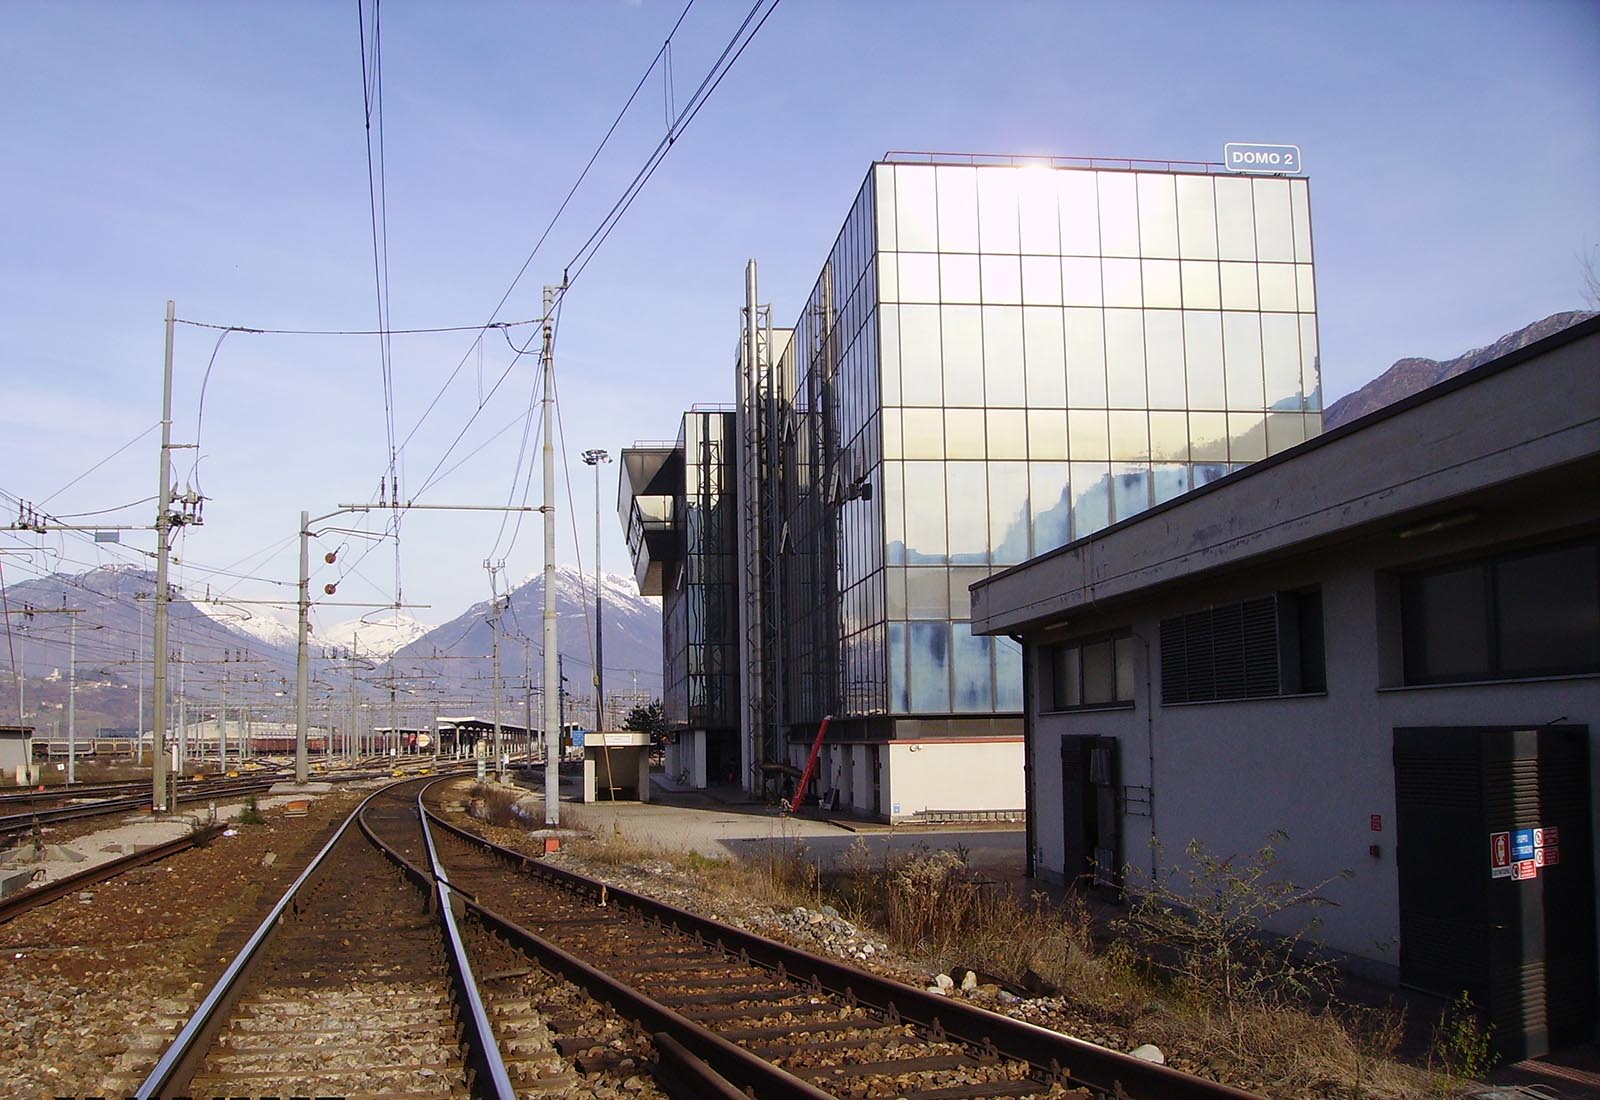 Extinguishing systems of railway stations - The Domo II railway station